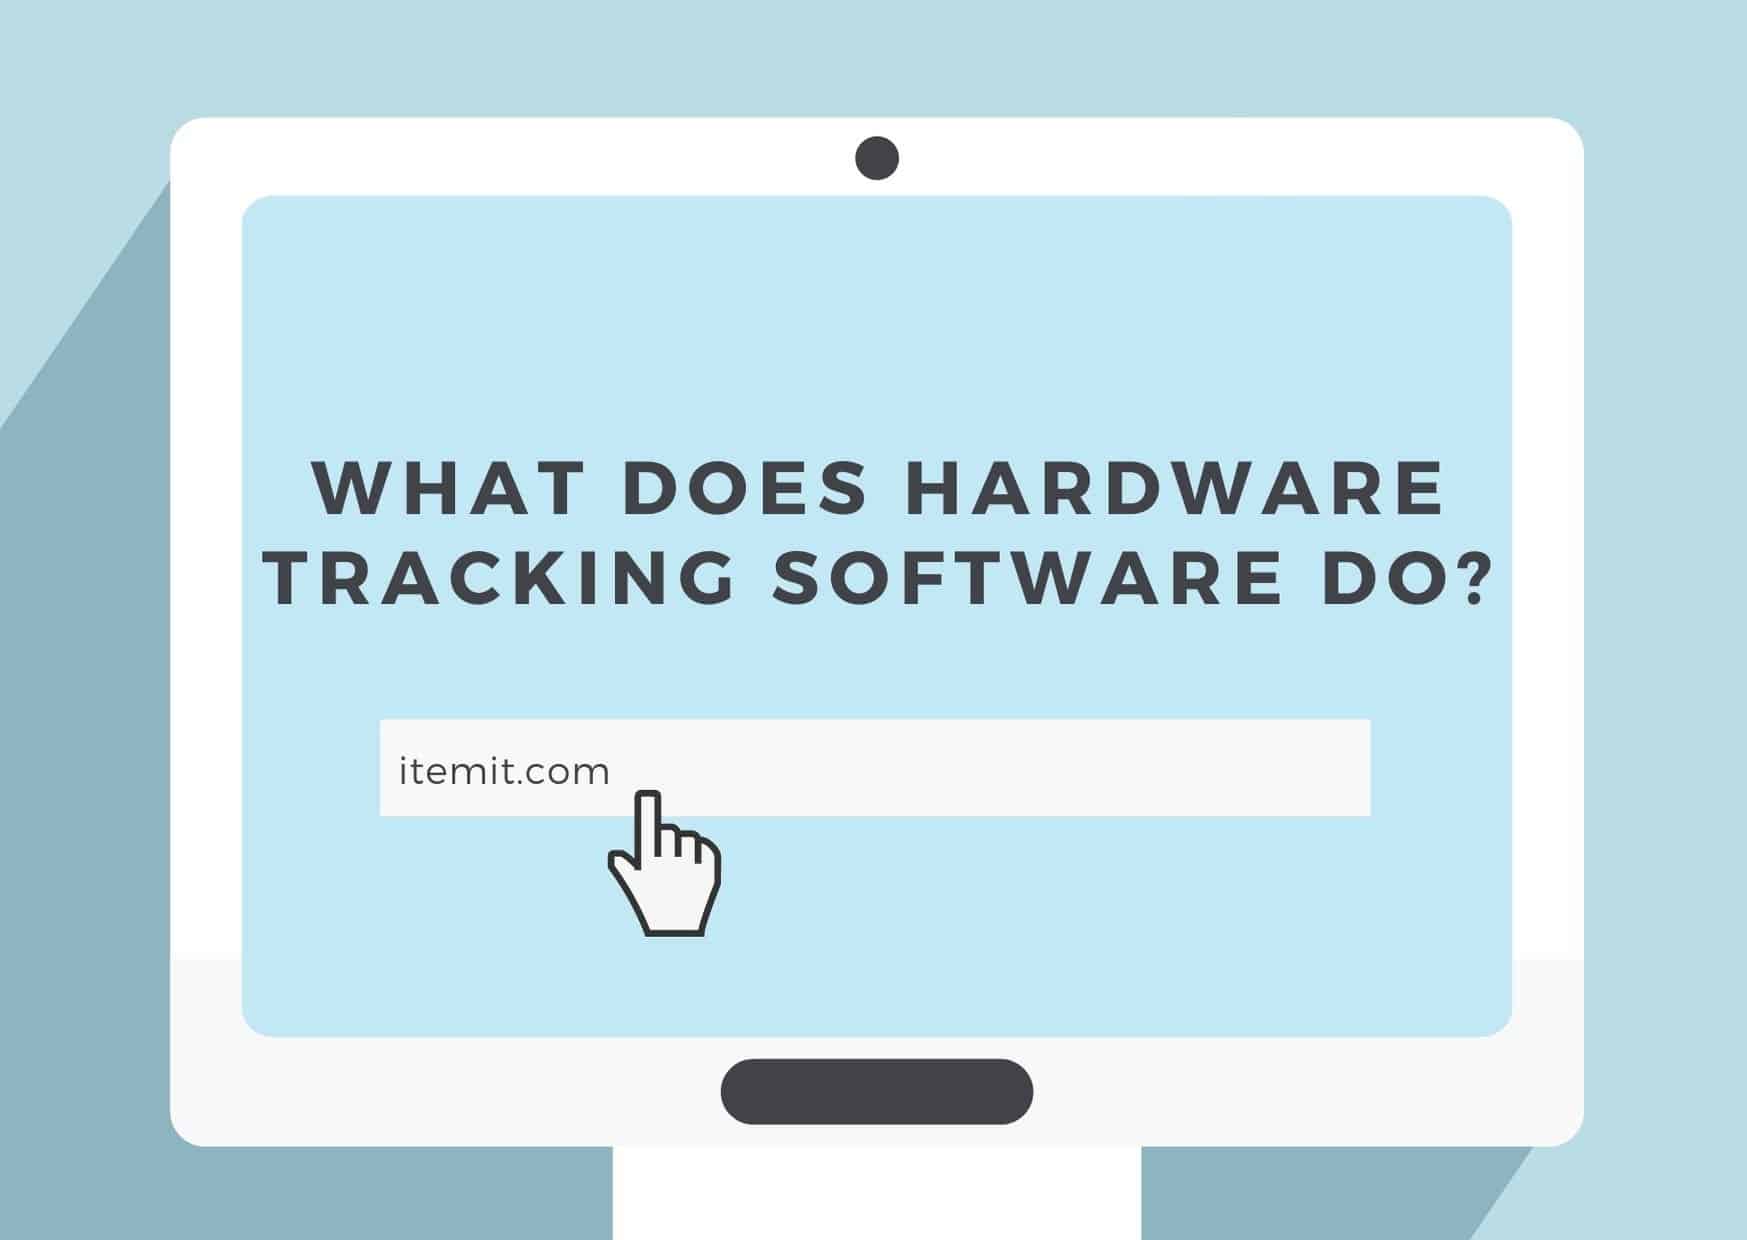 what does hardware tracking software do?